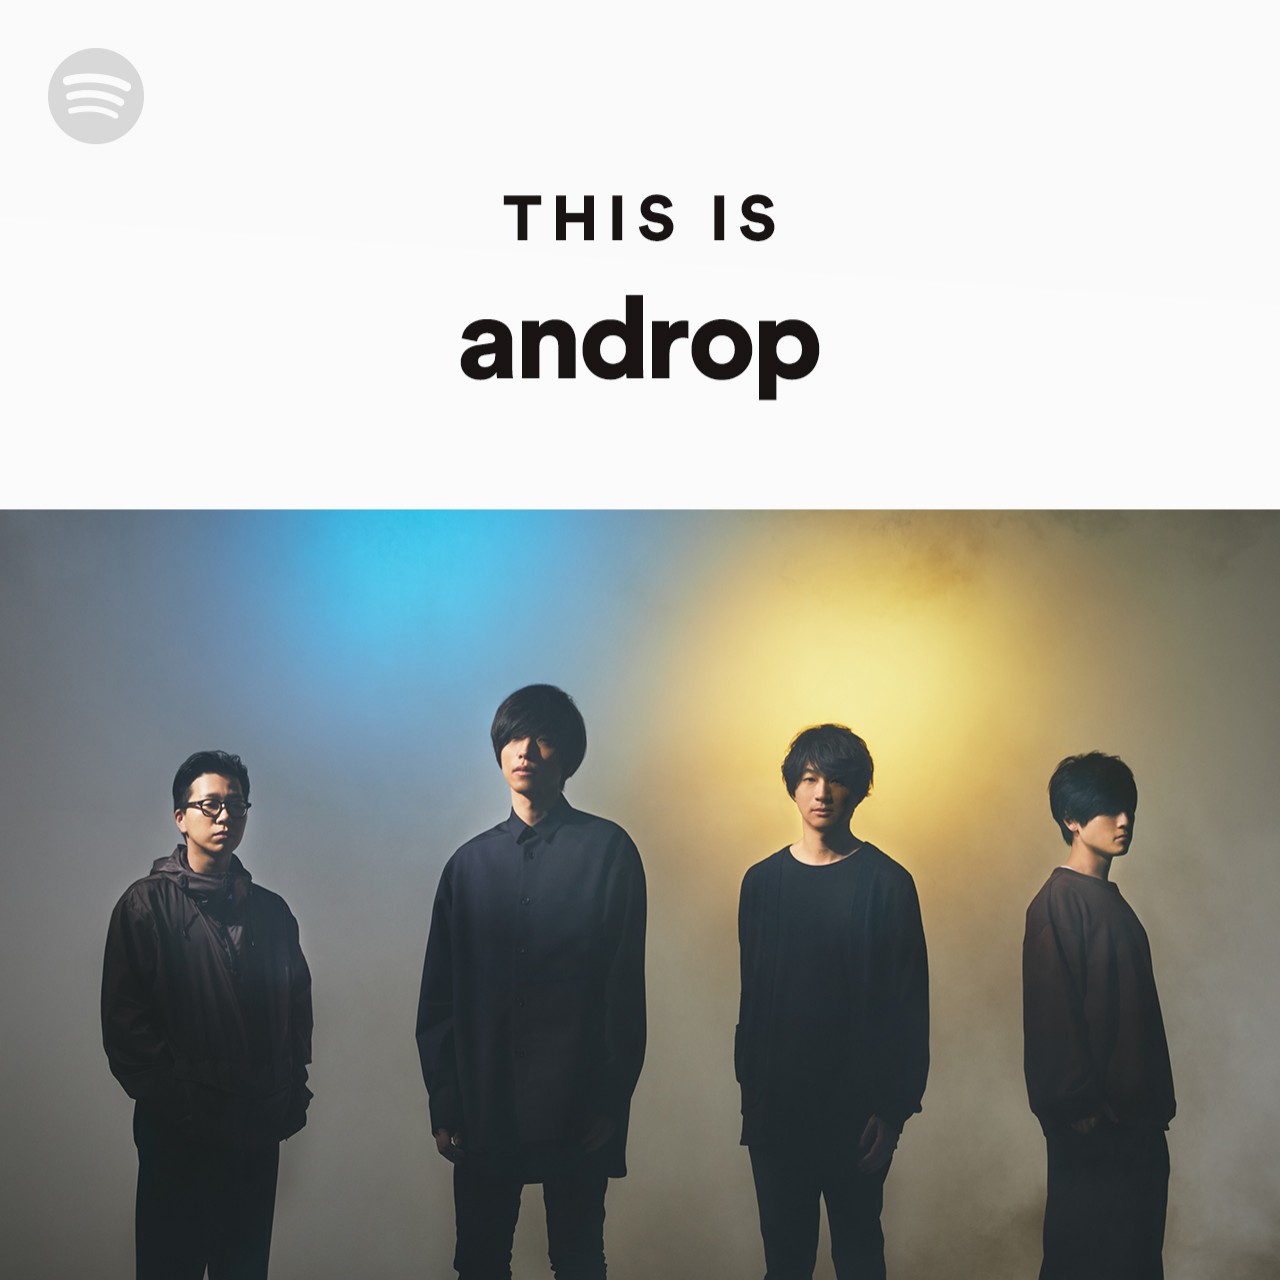 This Is androp